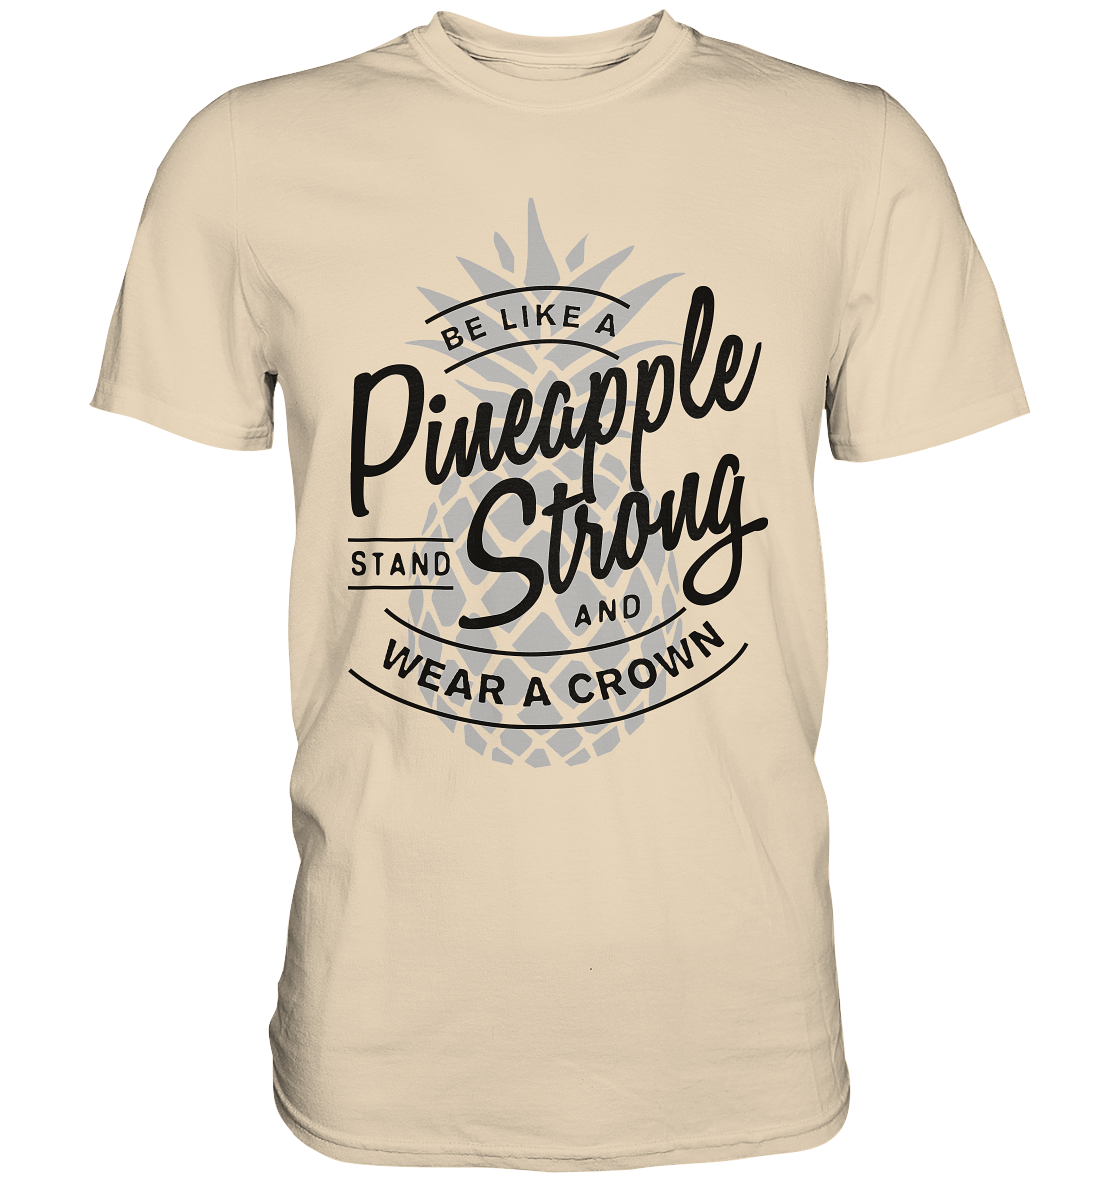 Pineapple Strong. Wear a crown. Ananas - Unisex Premium Shirt